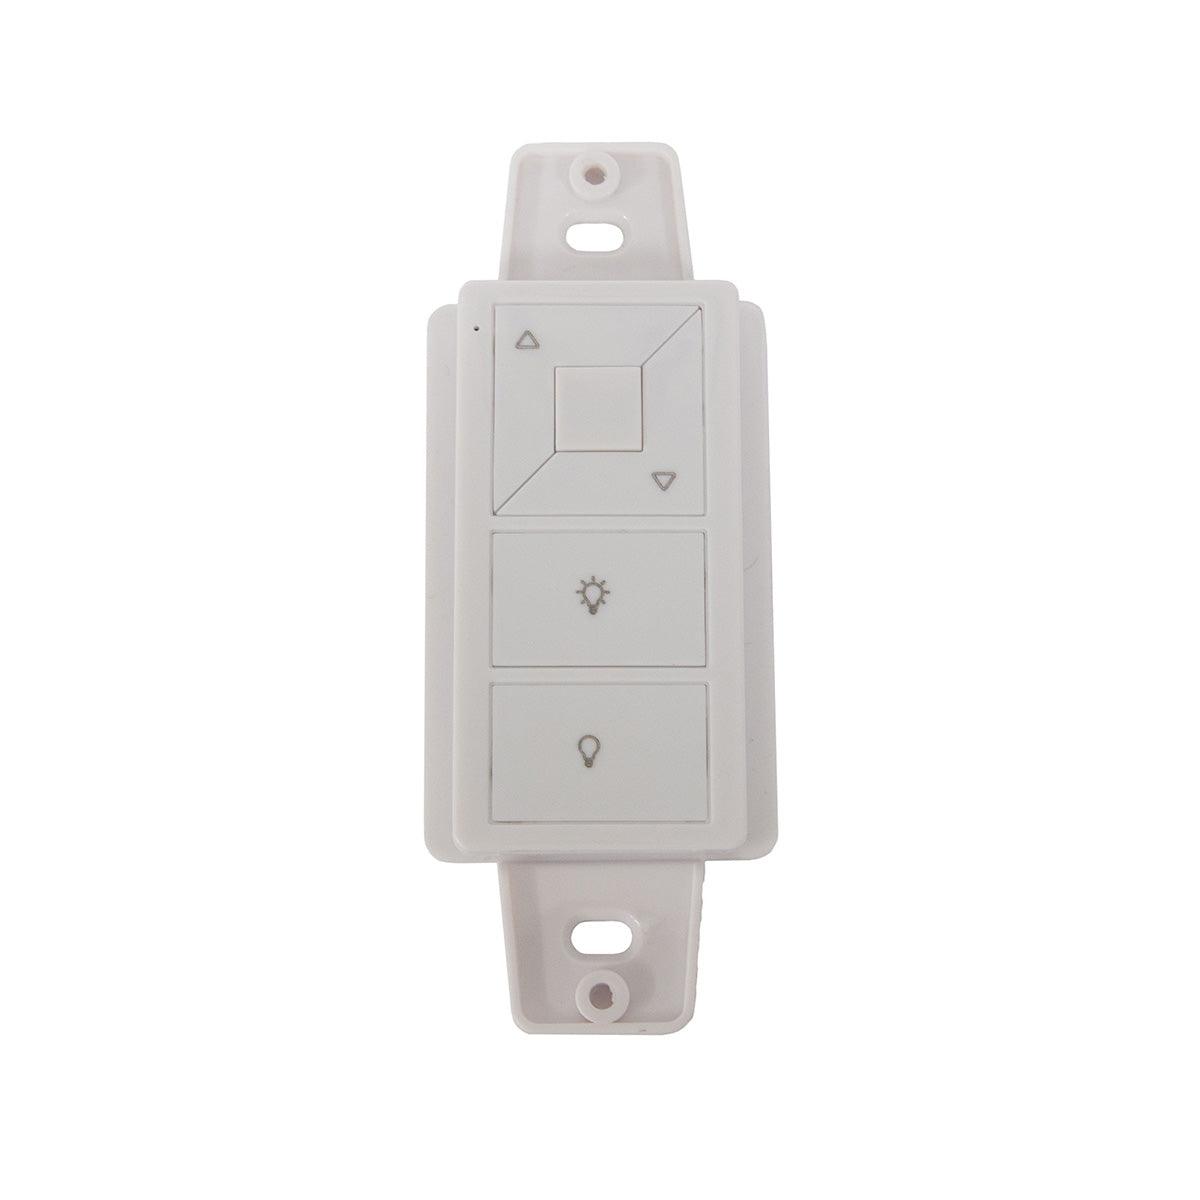 TOUCHDIAL Wall Mount RGB(W) LED Controller, Single Zone - Bees Lighting